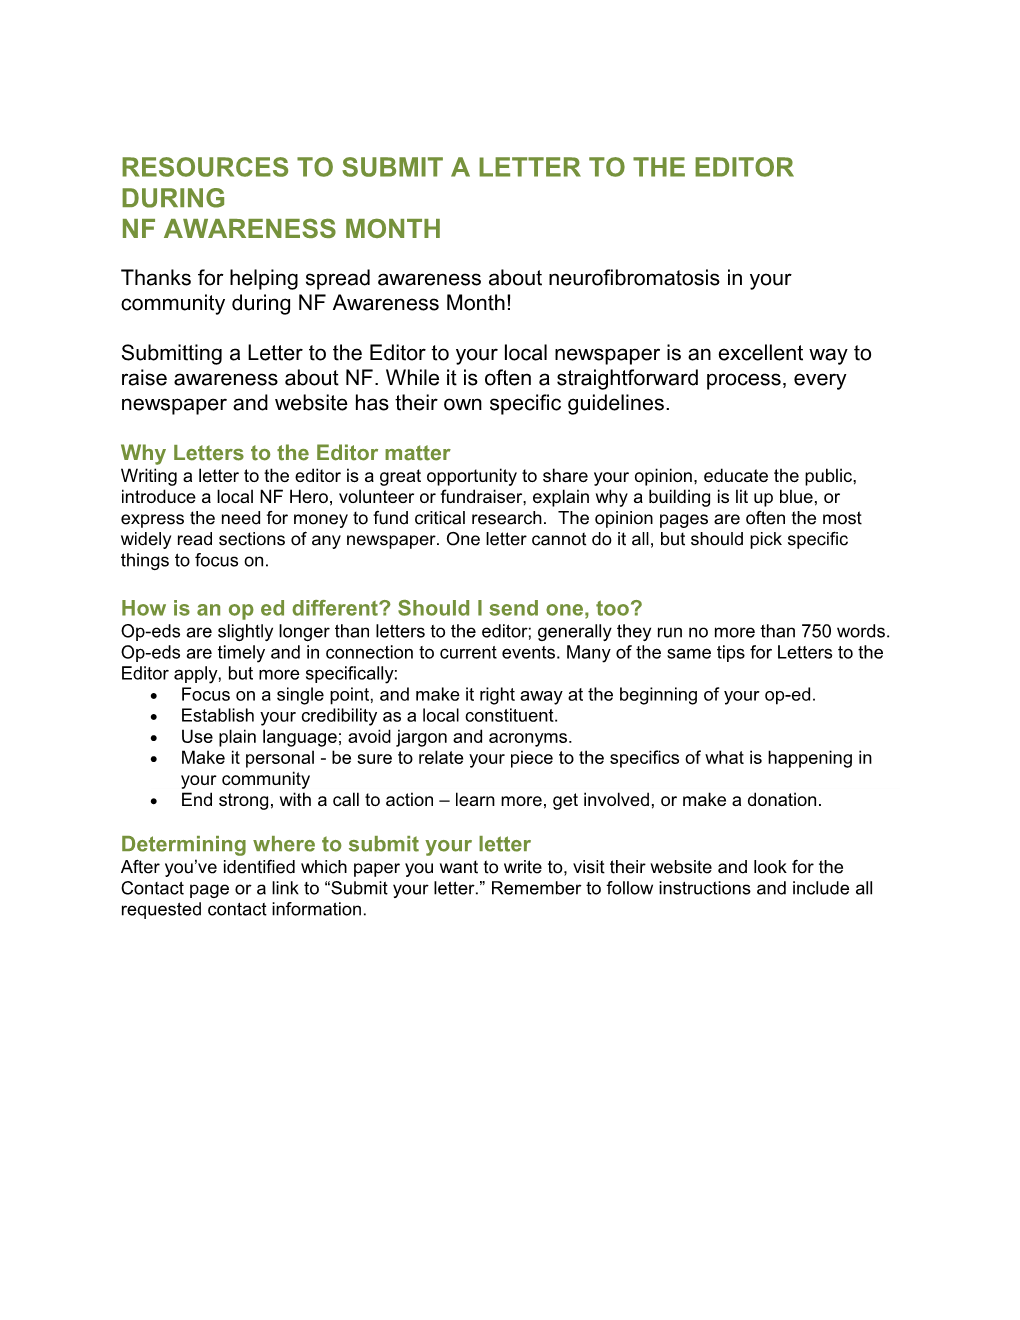 Resources to Submit a Letter to the Editor During Nf Awareness Month